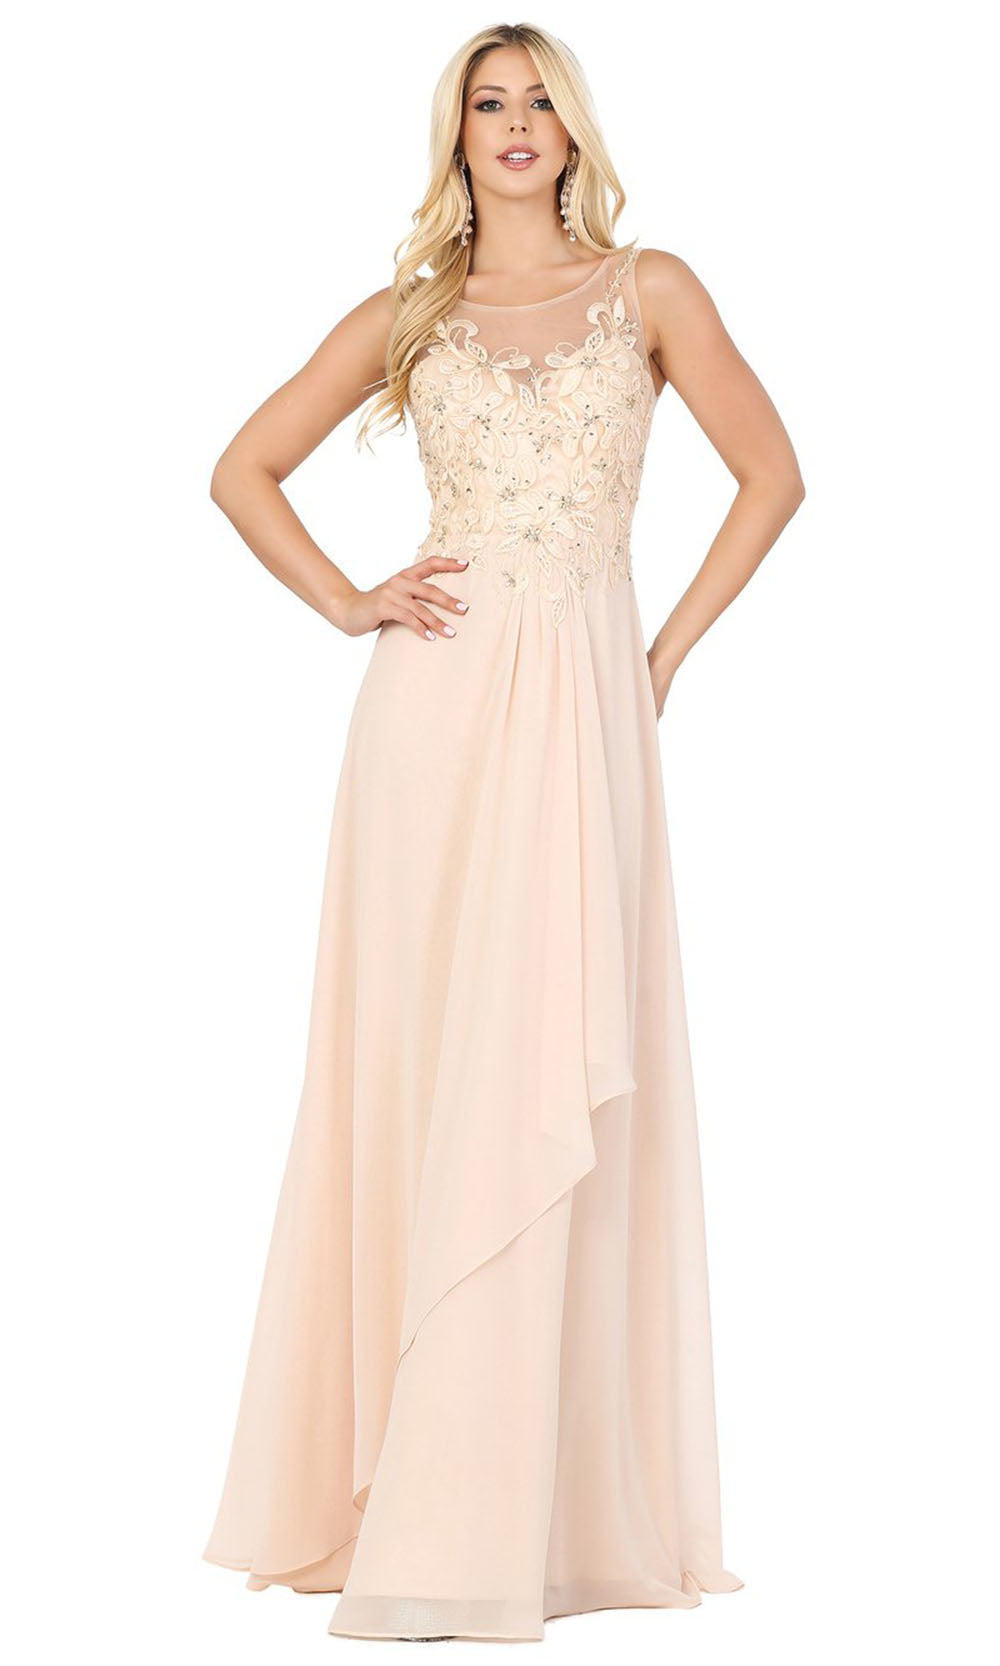 Dancing Queen - 2953 Embellished Bateau A-Line Dress In Neutral